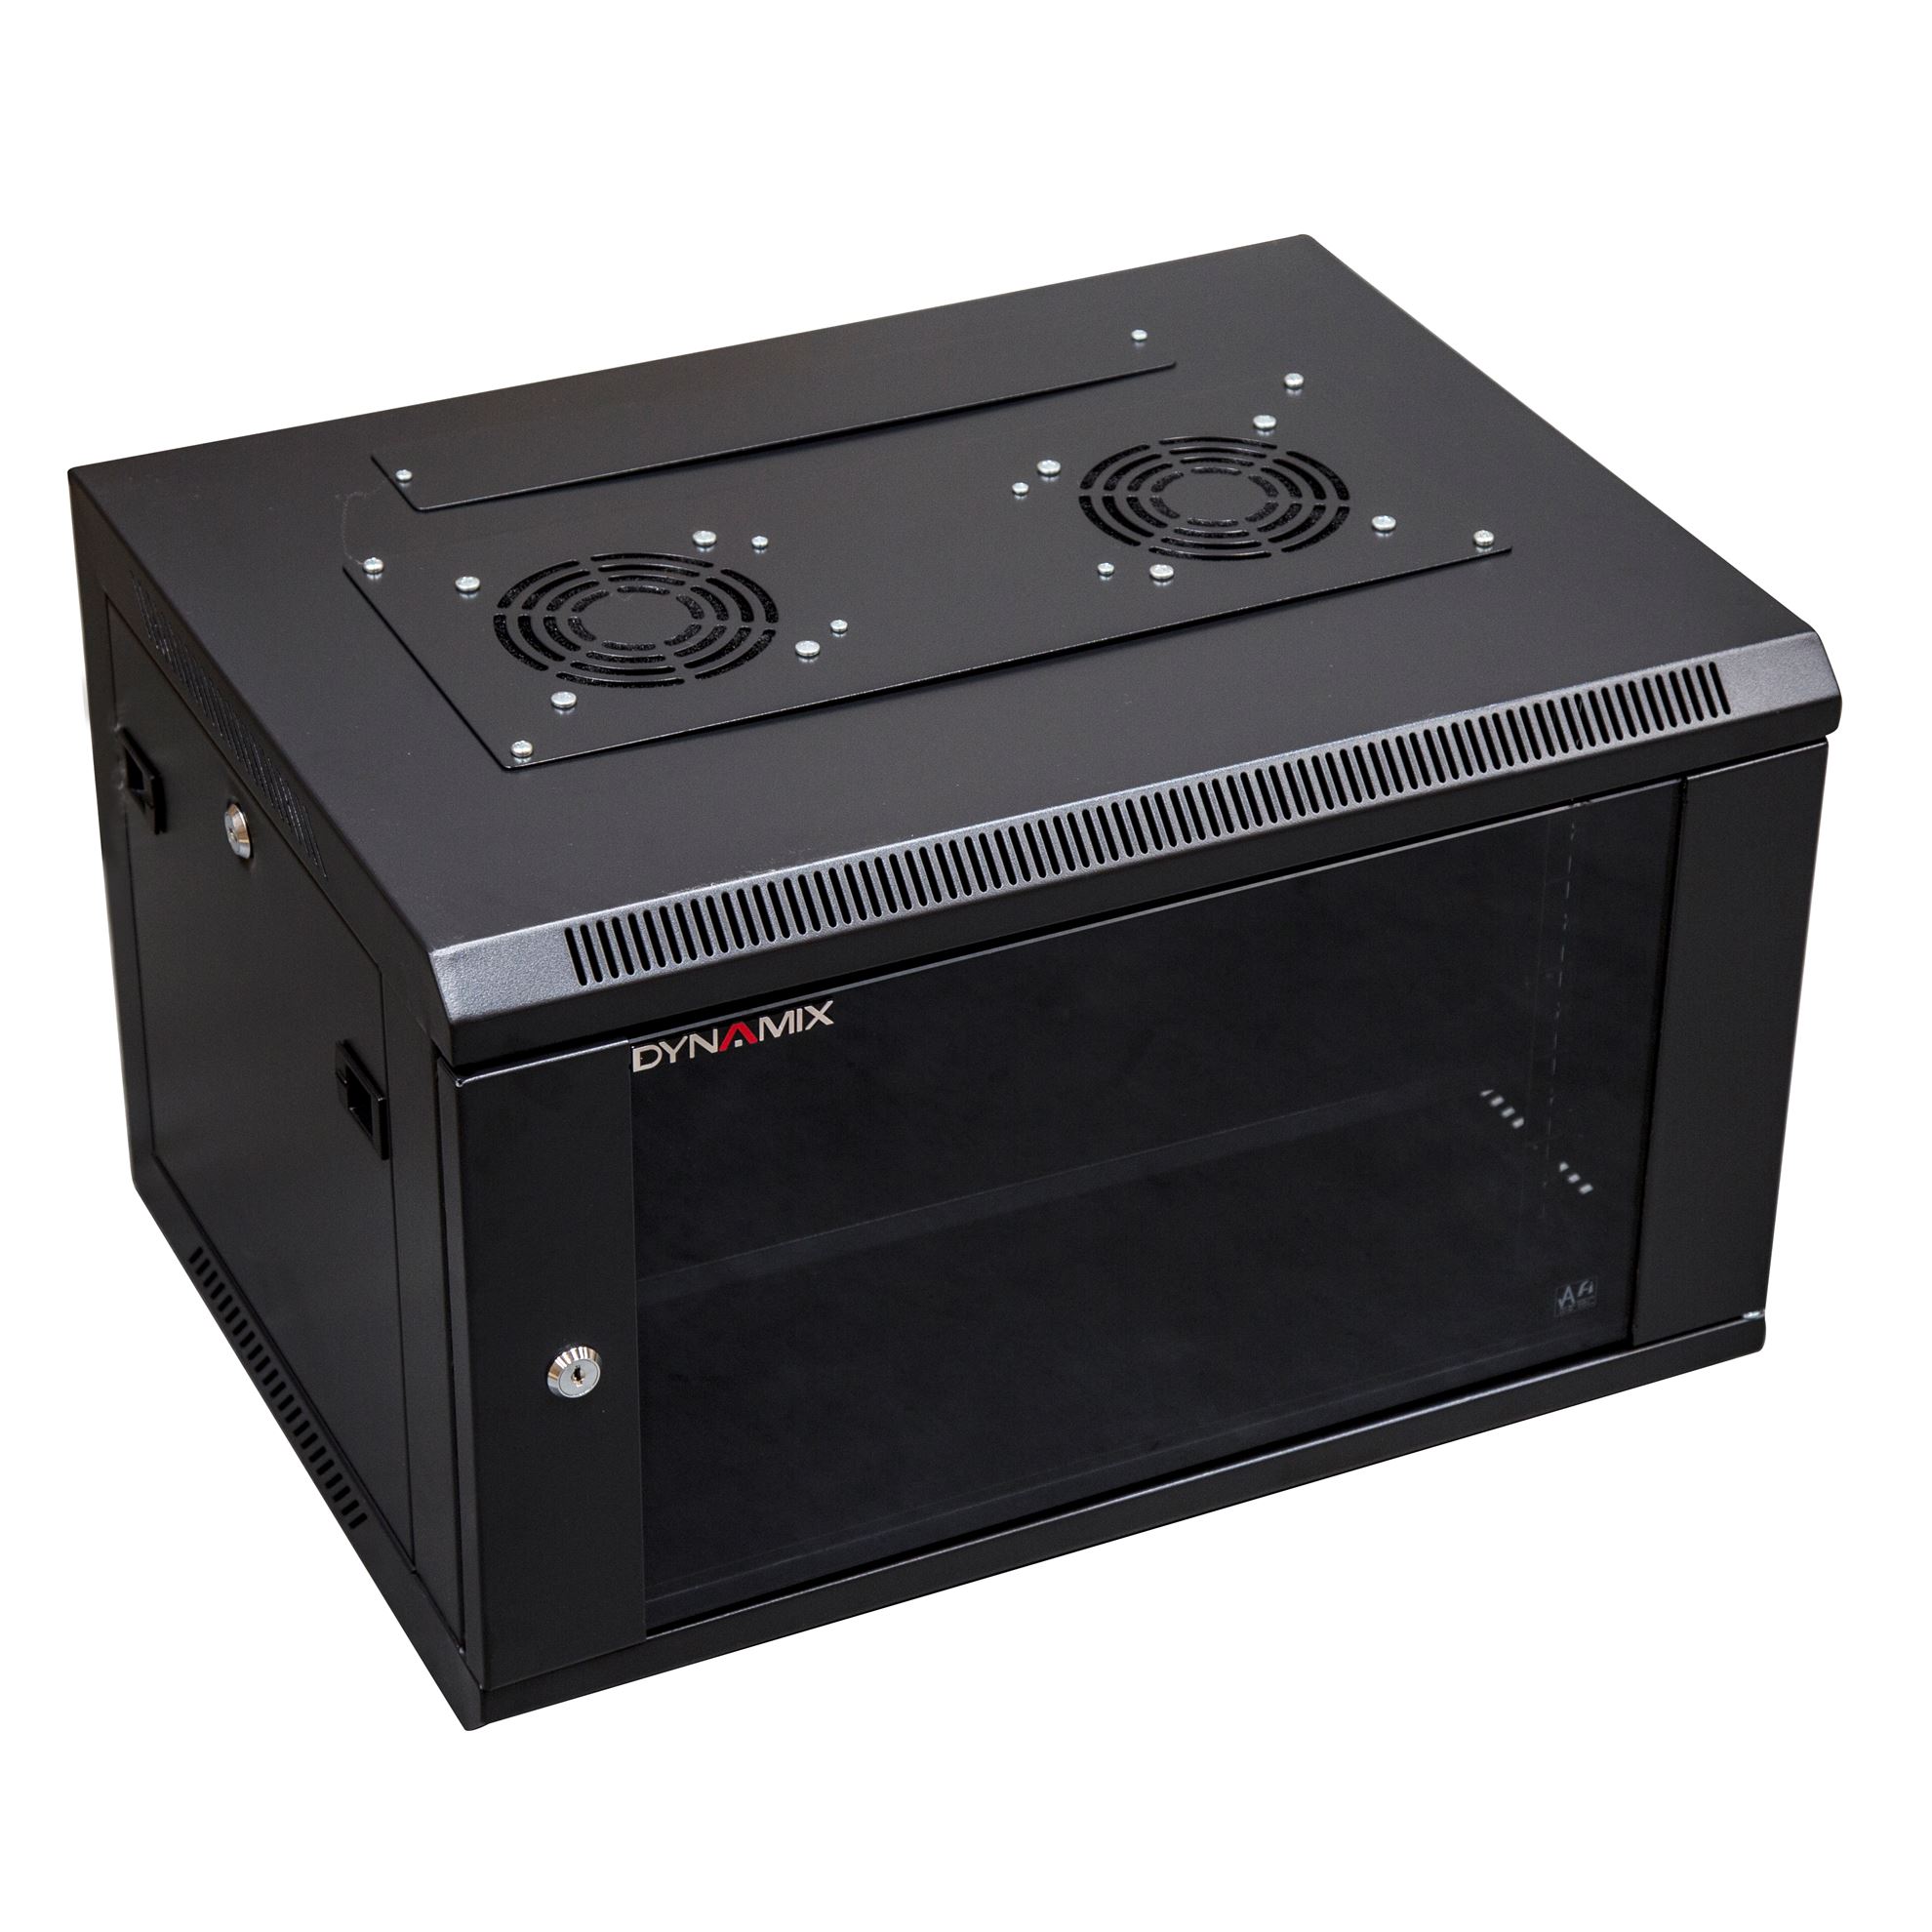 6RU Wall Mount Cabinet 450mm Deep (600x450x368mm) Includes 1x Fixed Shelf, 2x Fans and 10x Cage Nuts.